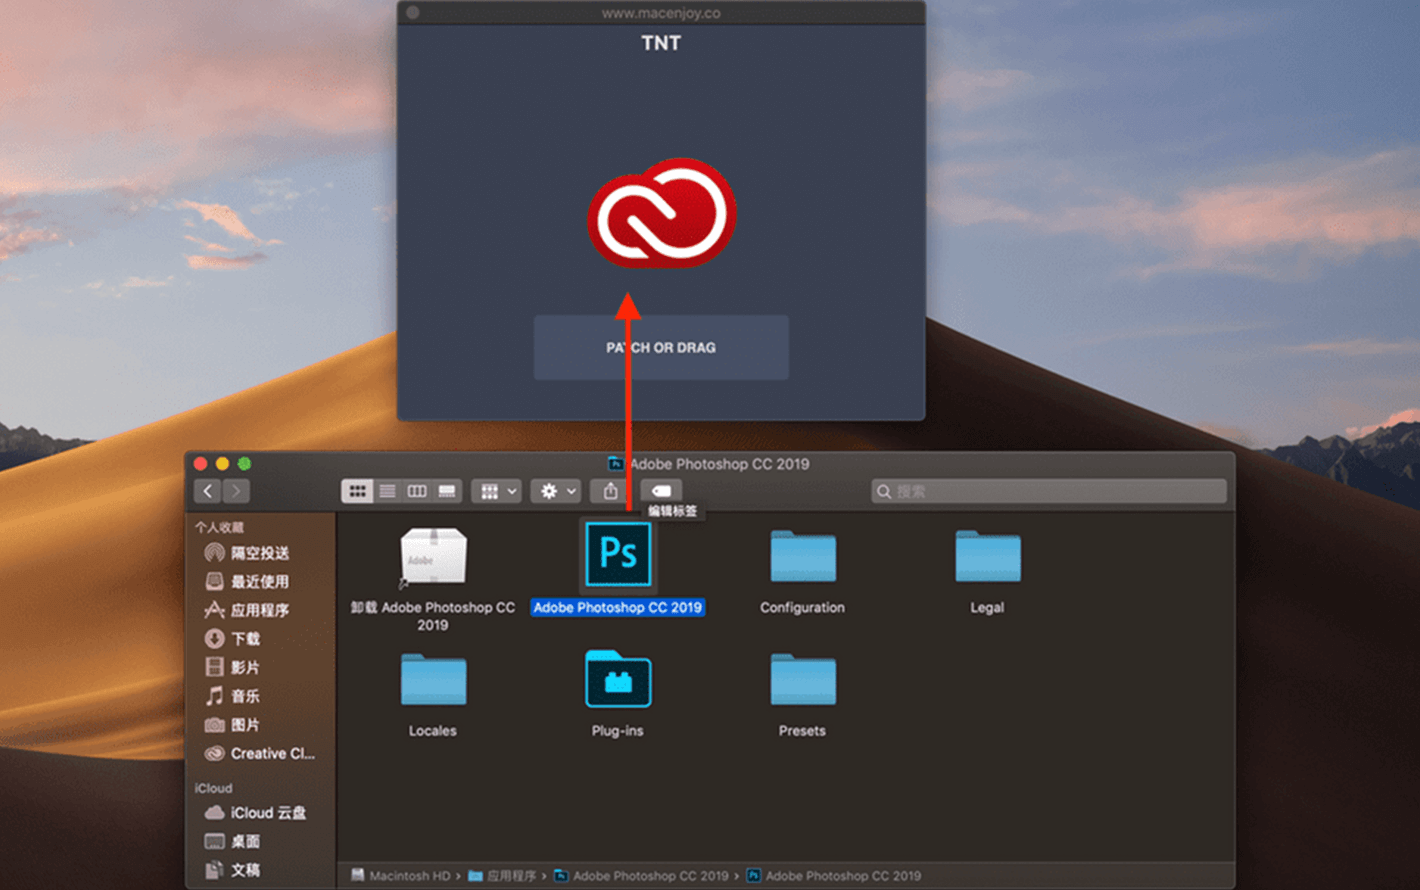 photoshop 2018 activator for mac